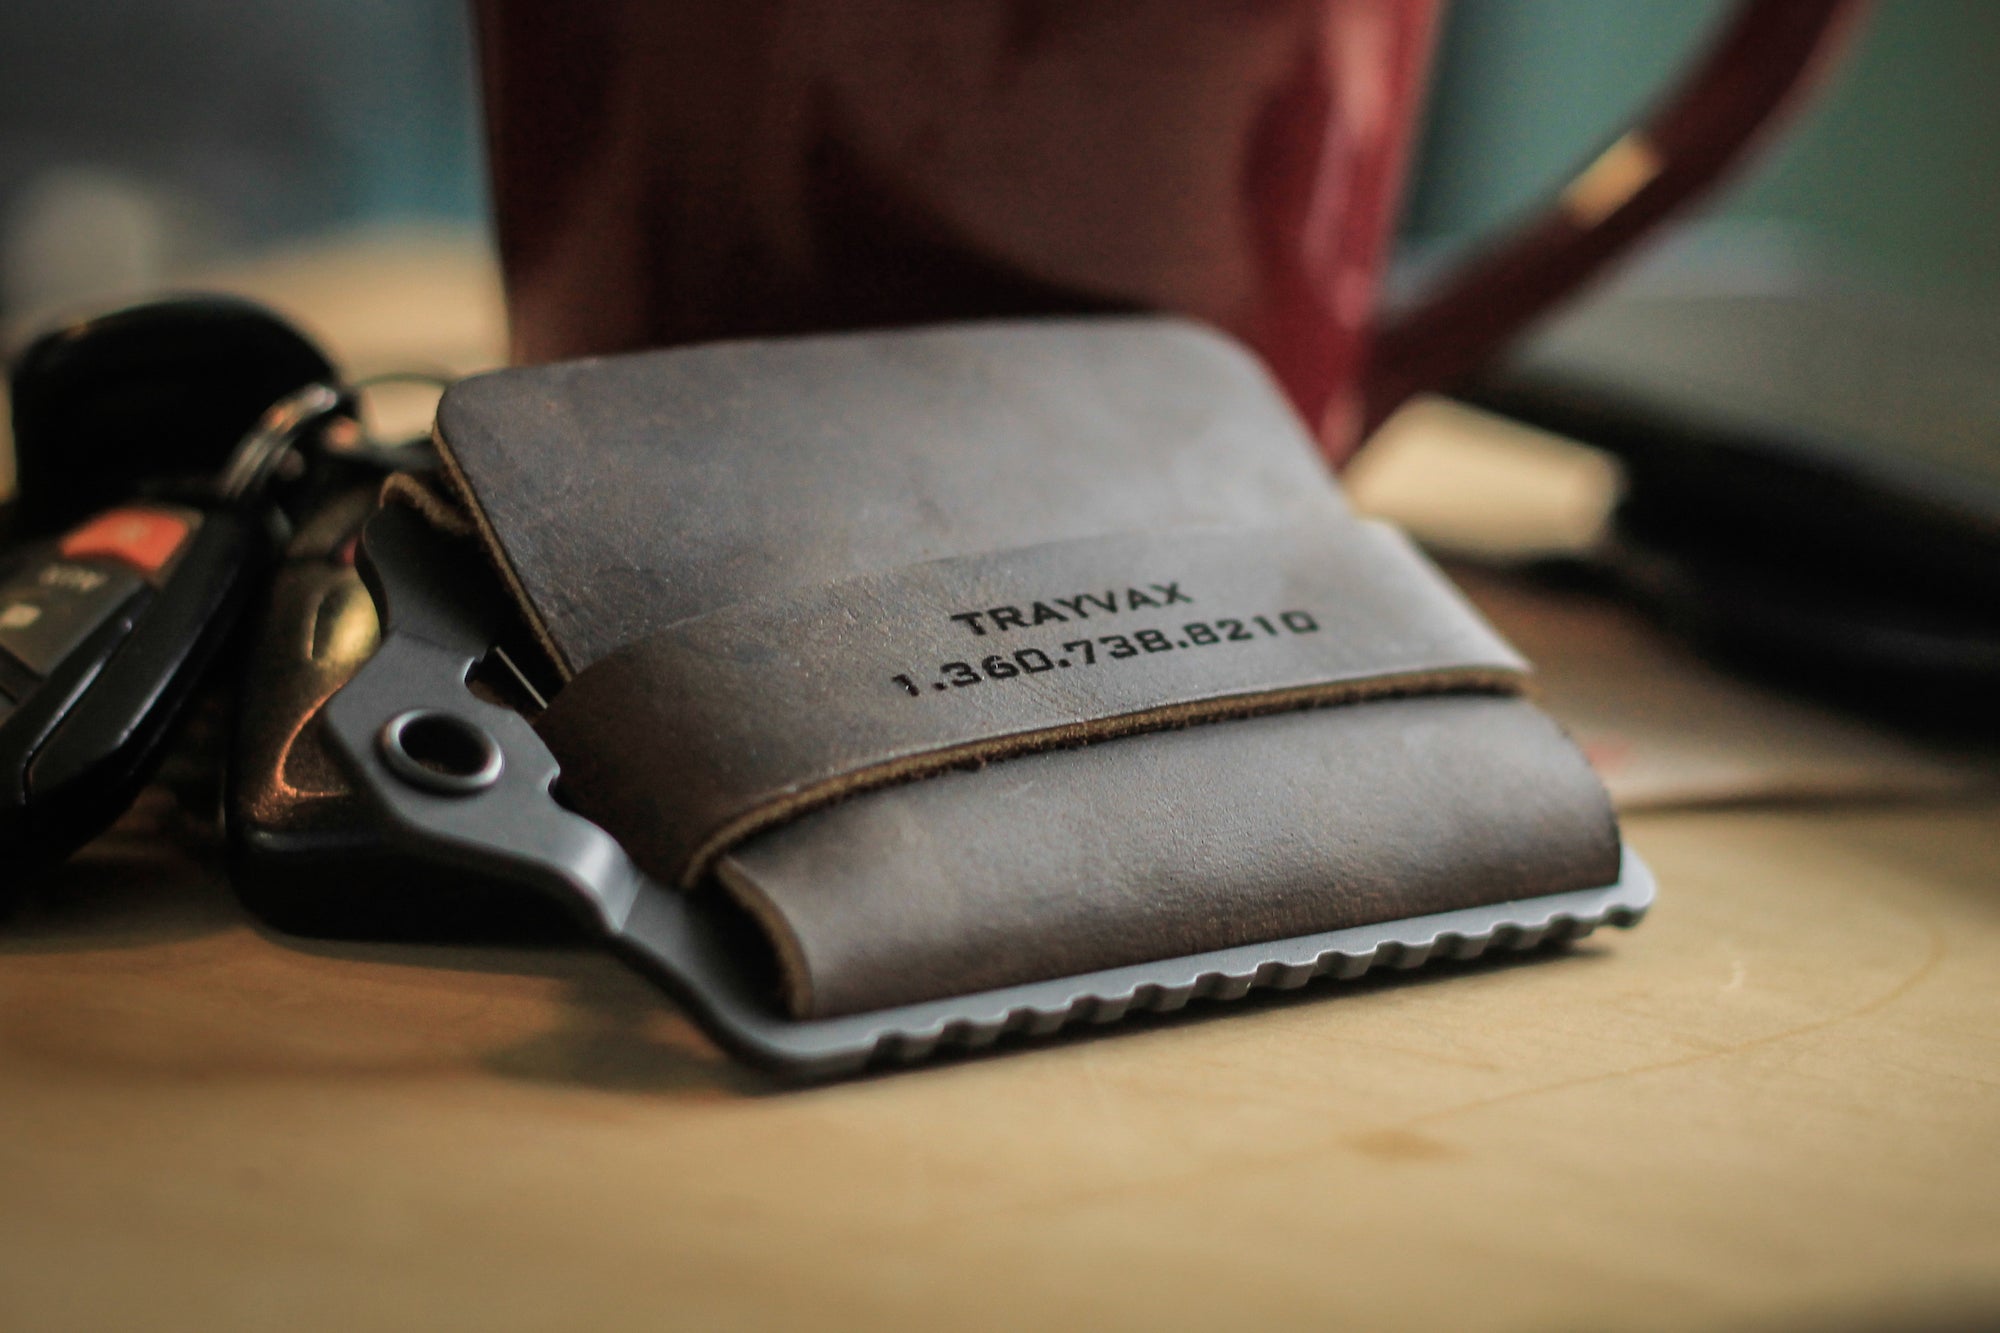 What's a Good Wallet That Is Both Strong and Easy to Carry?